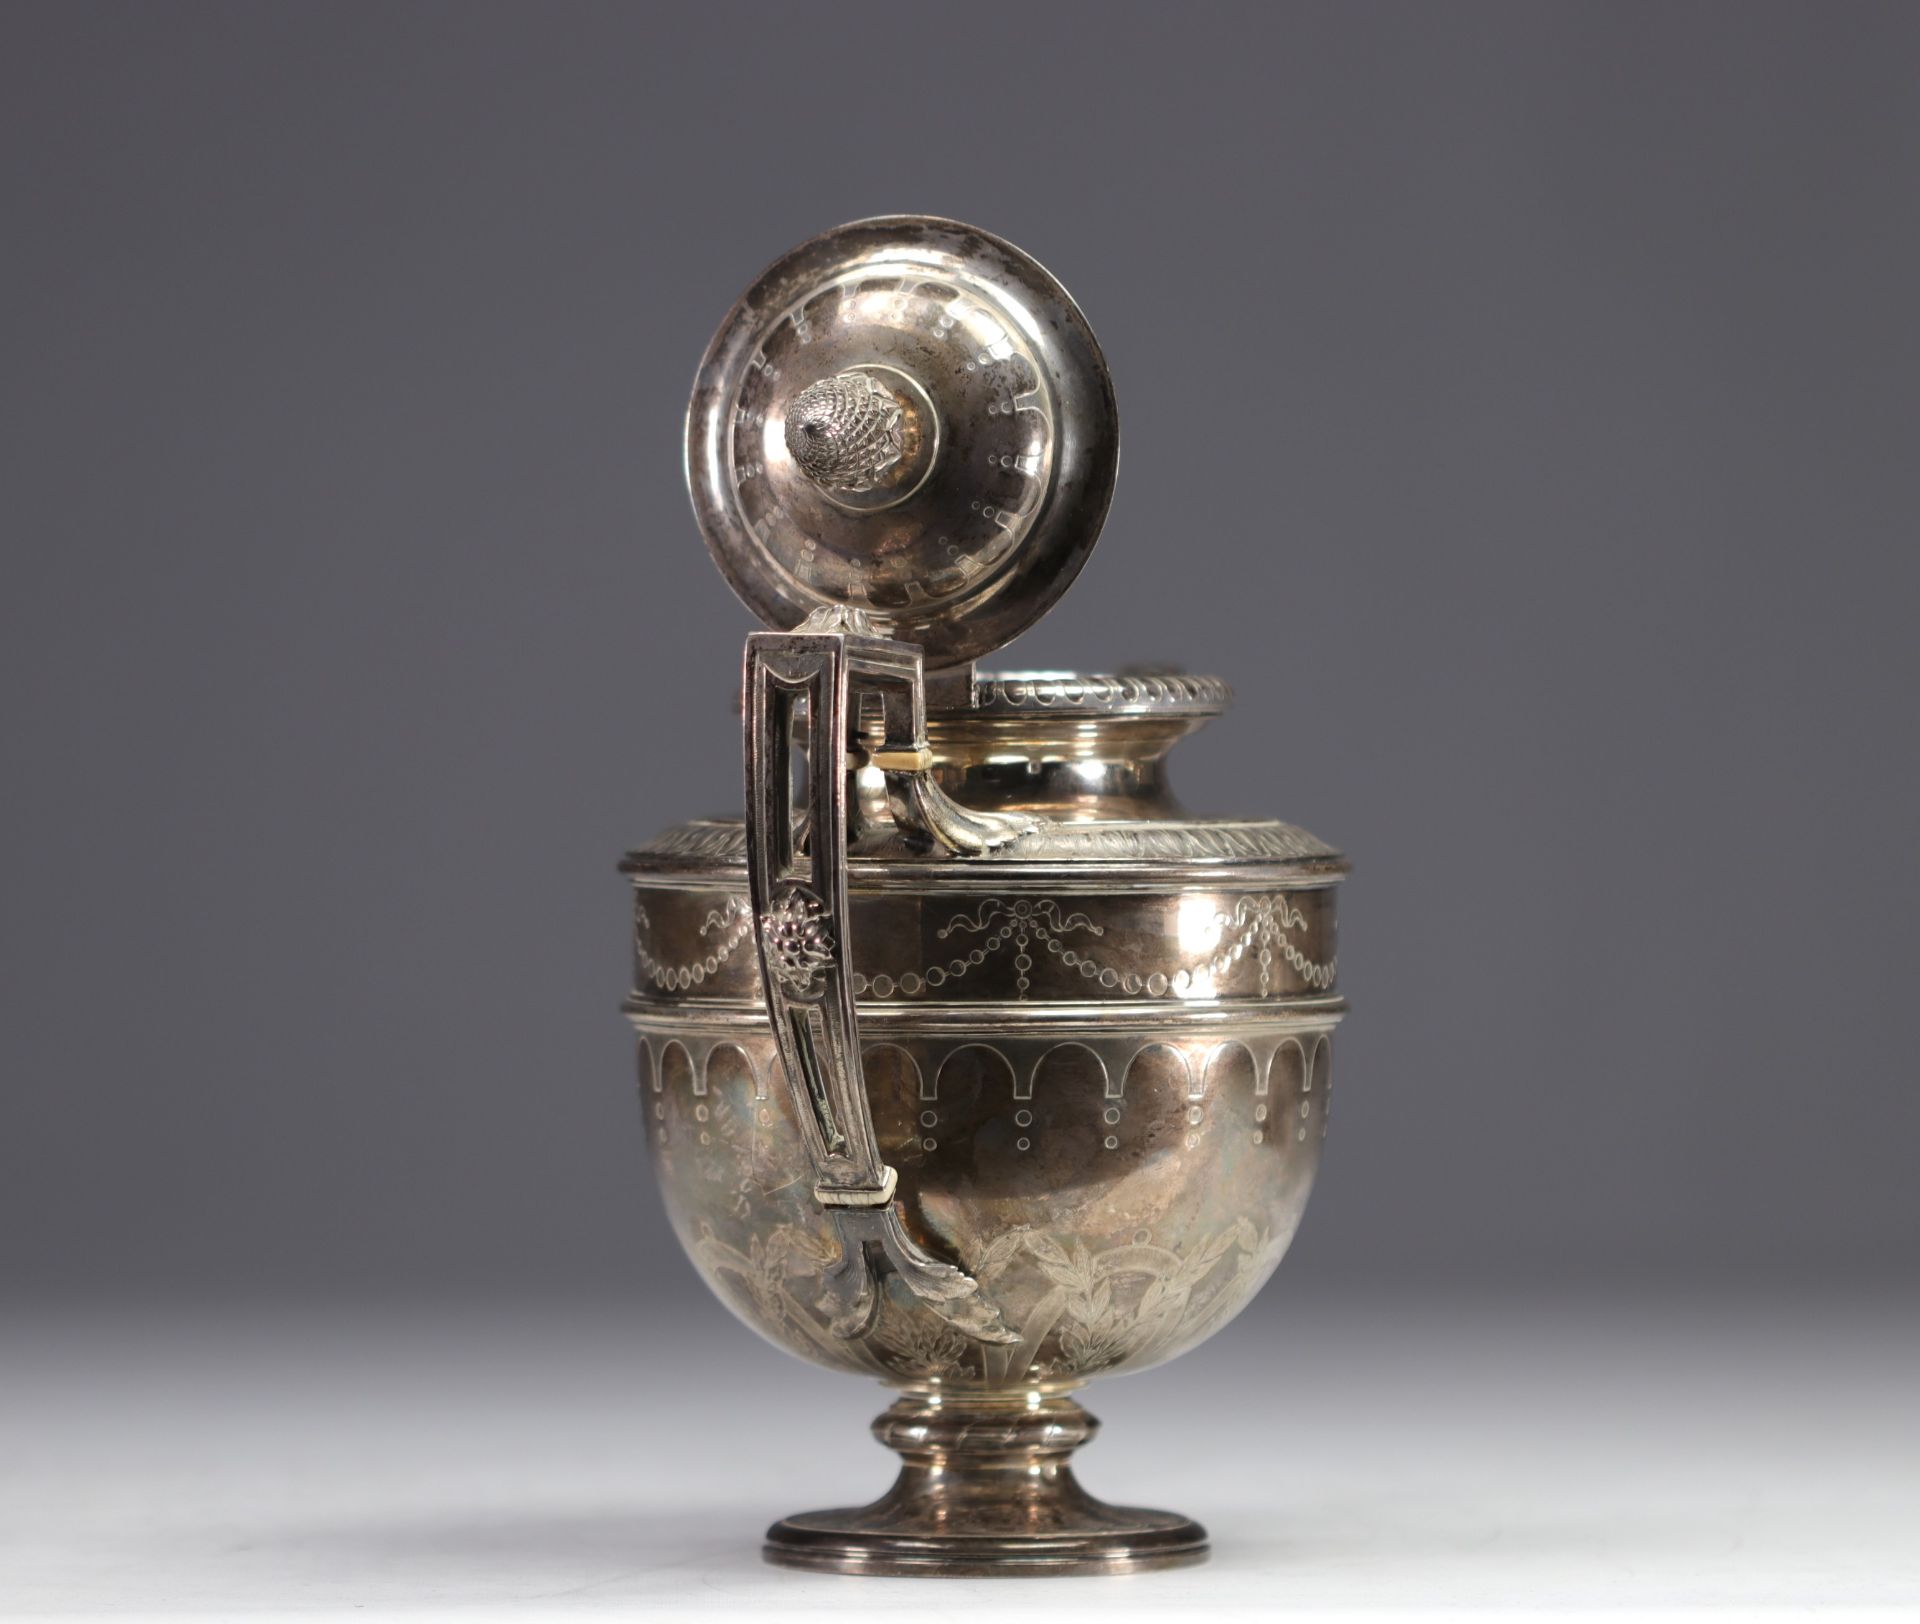 Jean-Baptiste Claude ODIOT a PARIS - Solid silver coffee service. - Image 9 of 11